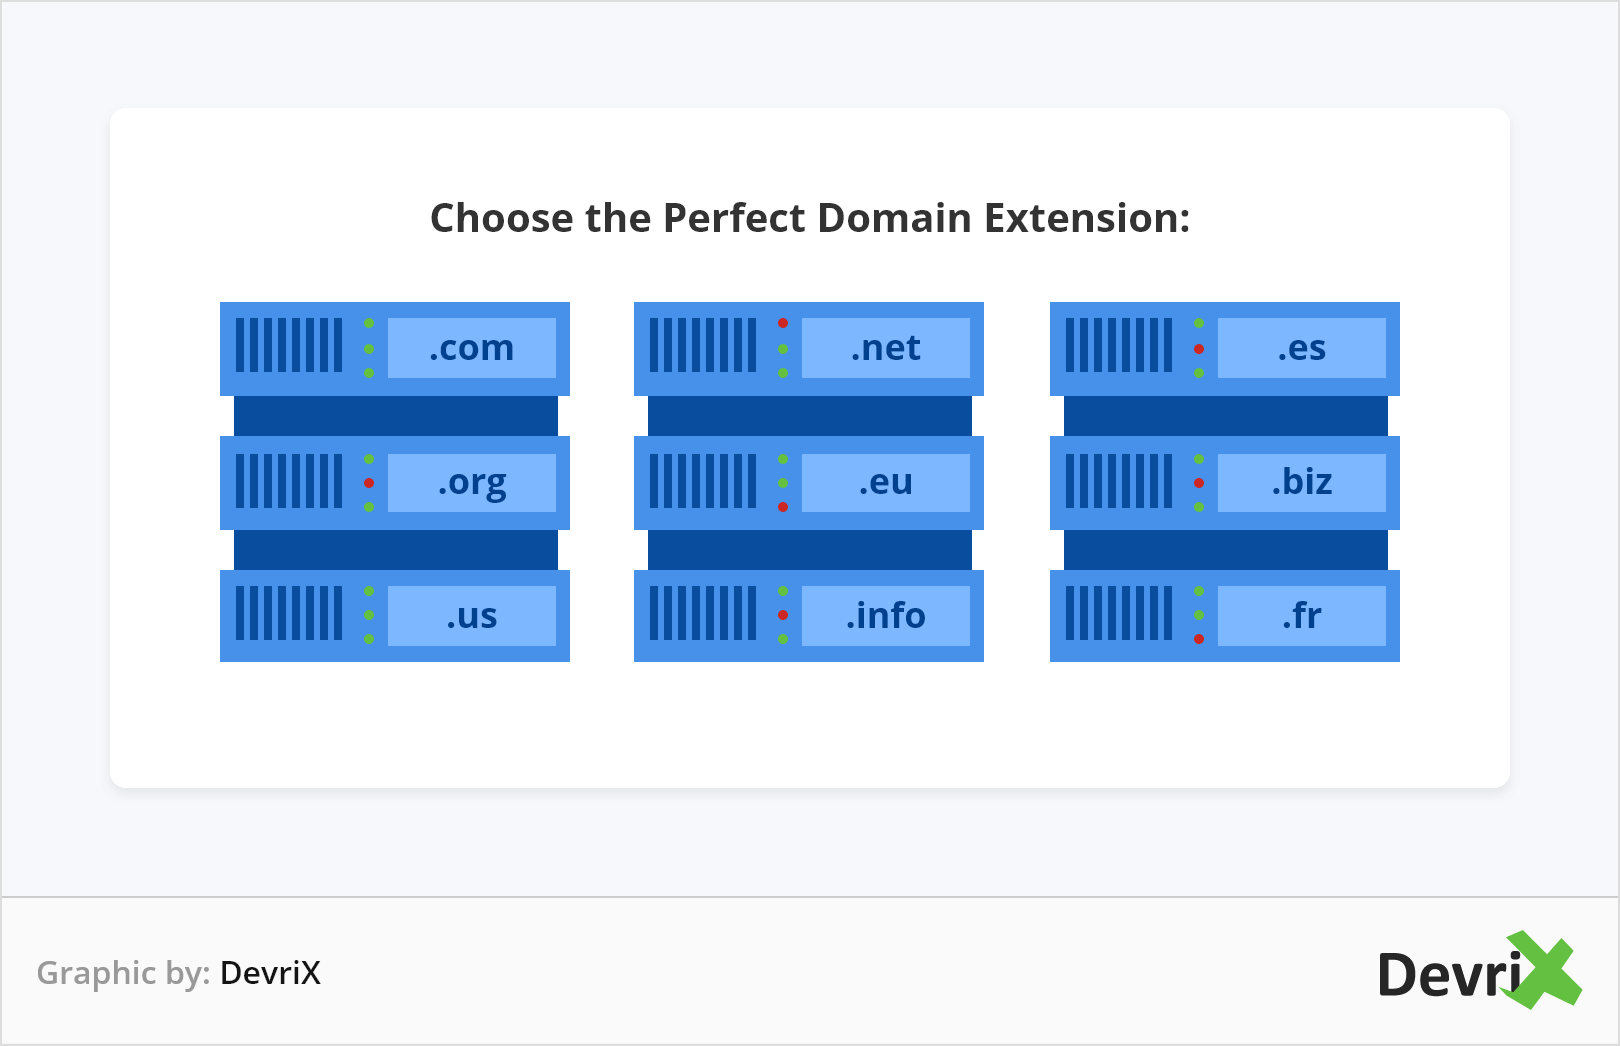 Choose the Perfect Domain Extension